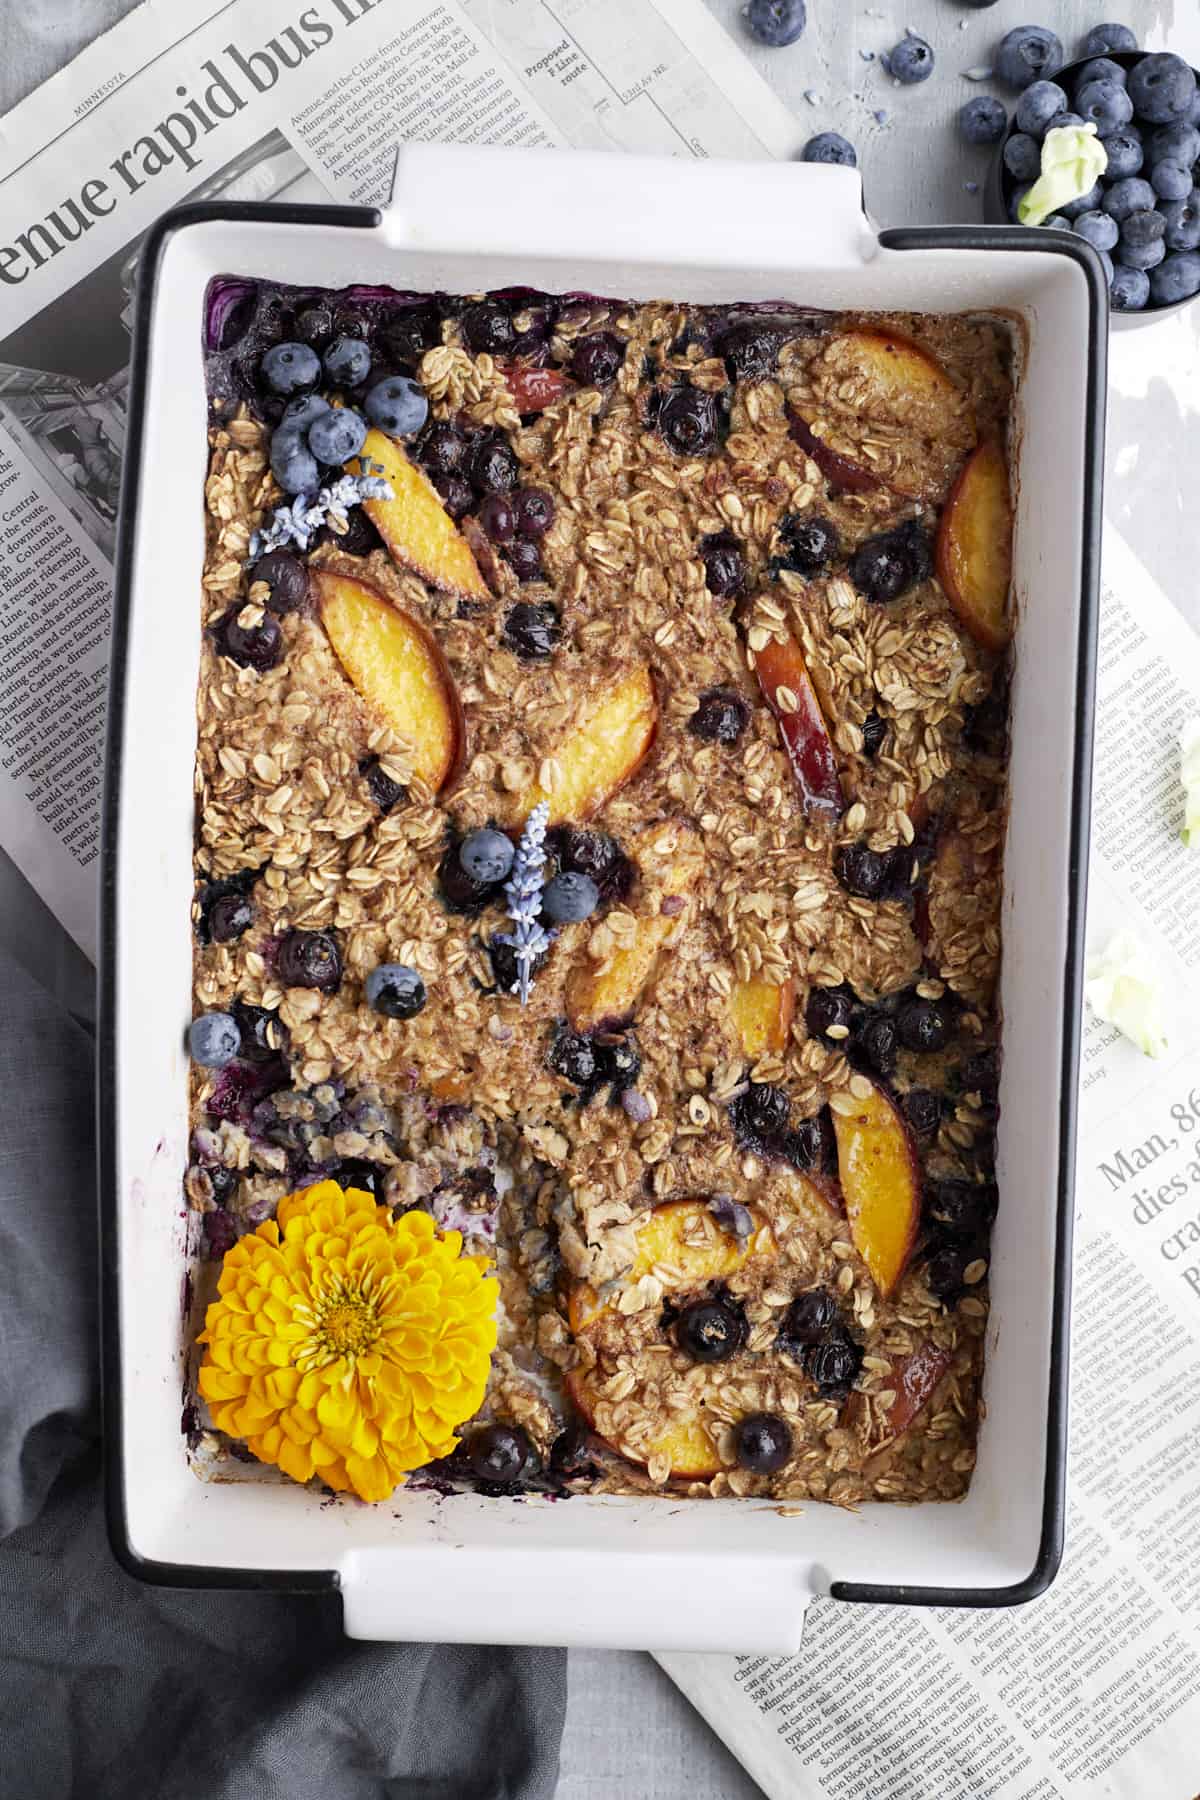 Overhead image of peach blueberry baked oats in a baking dish.